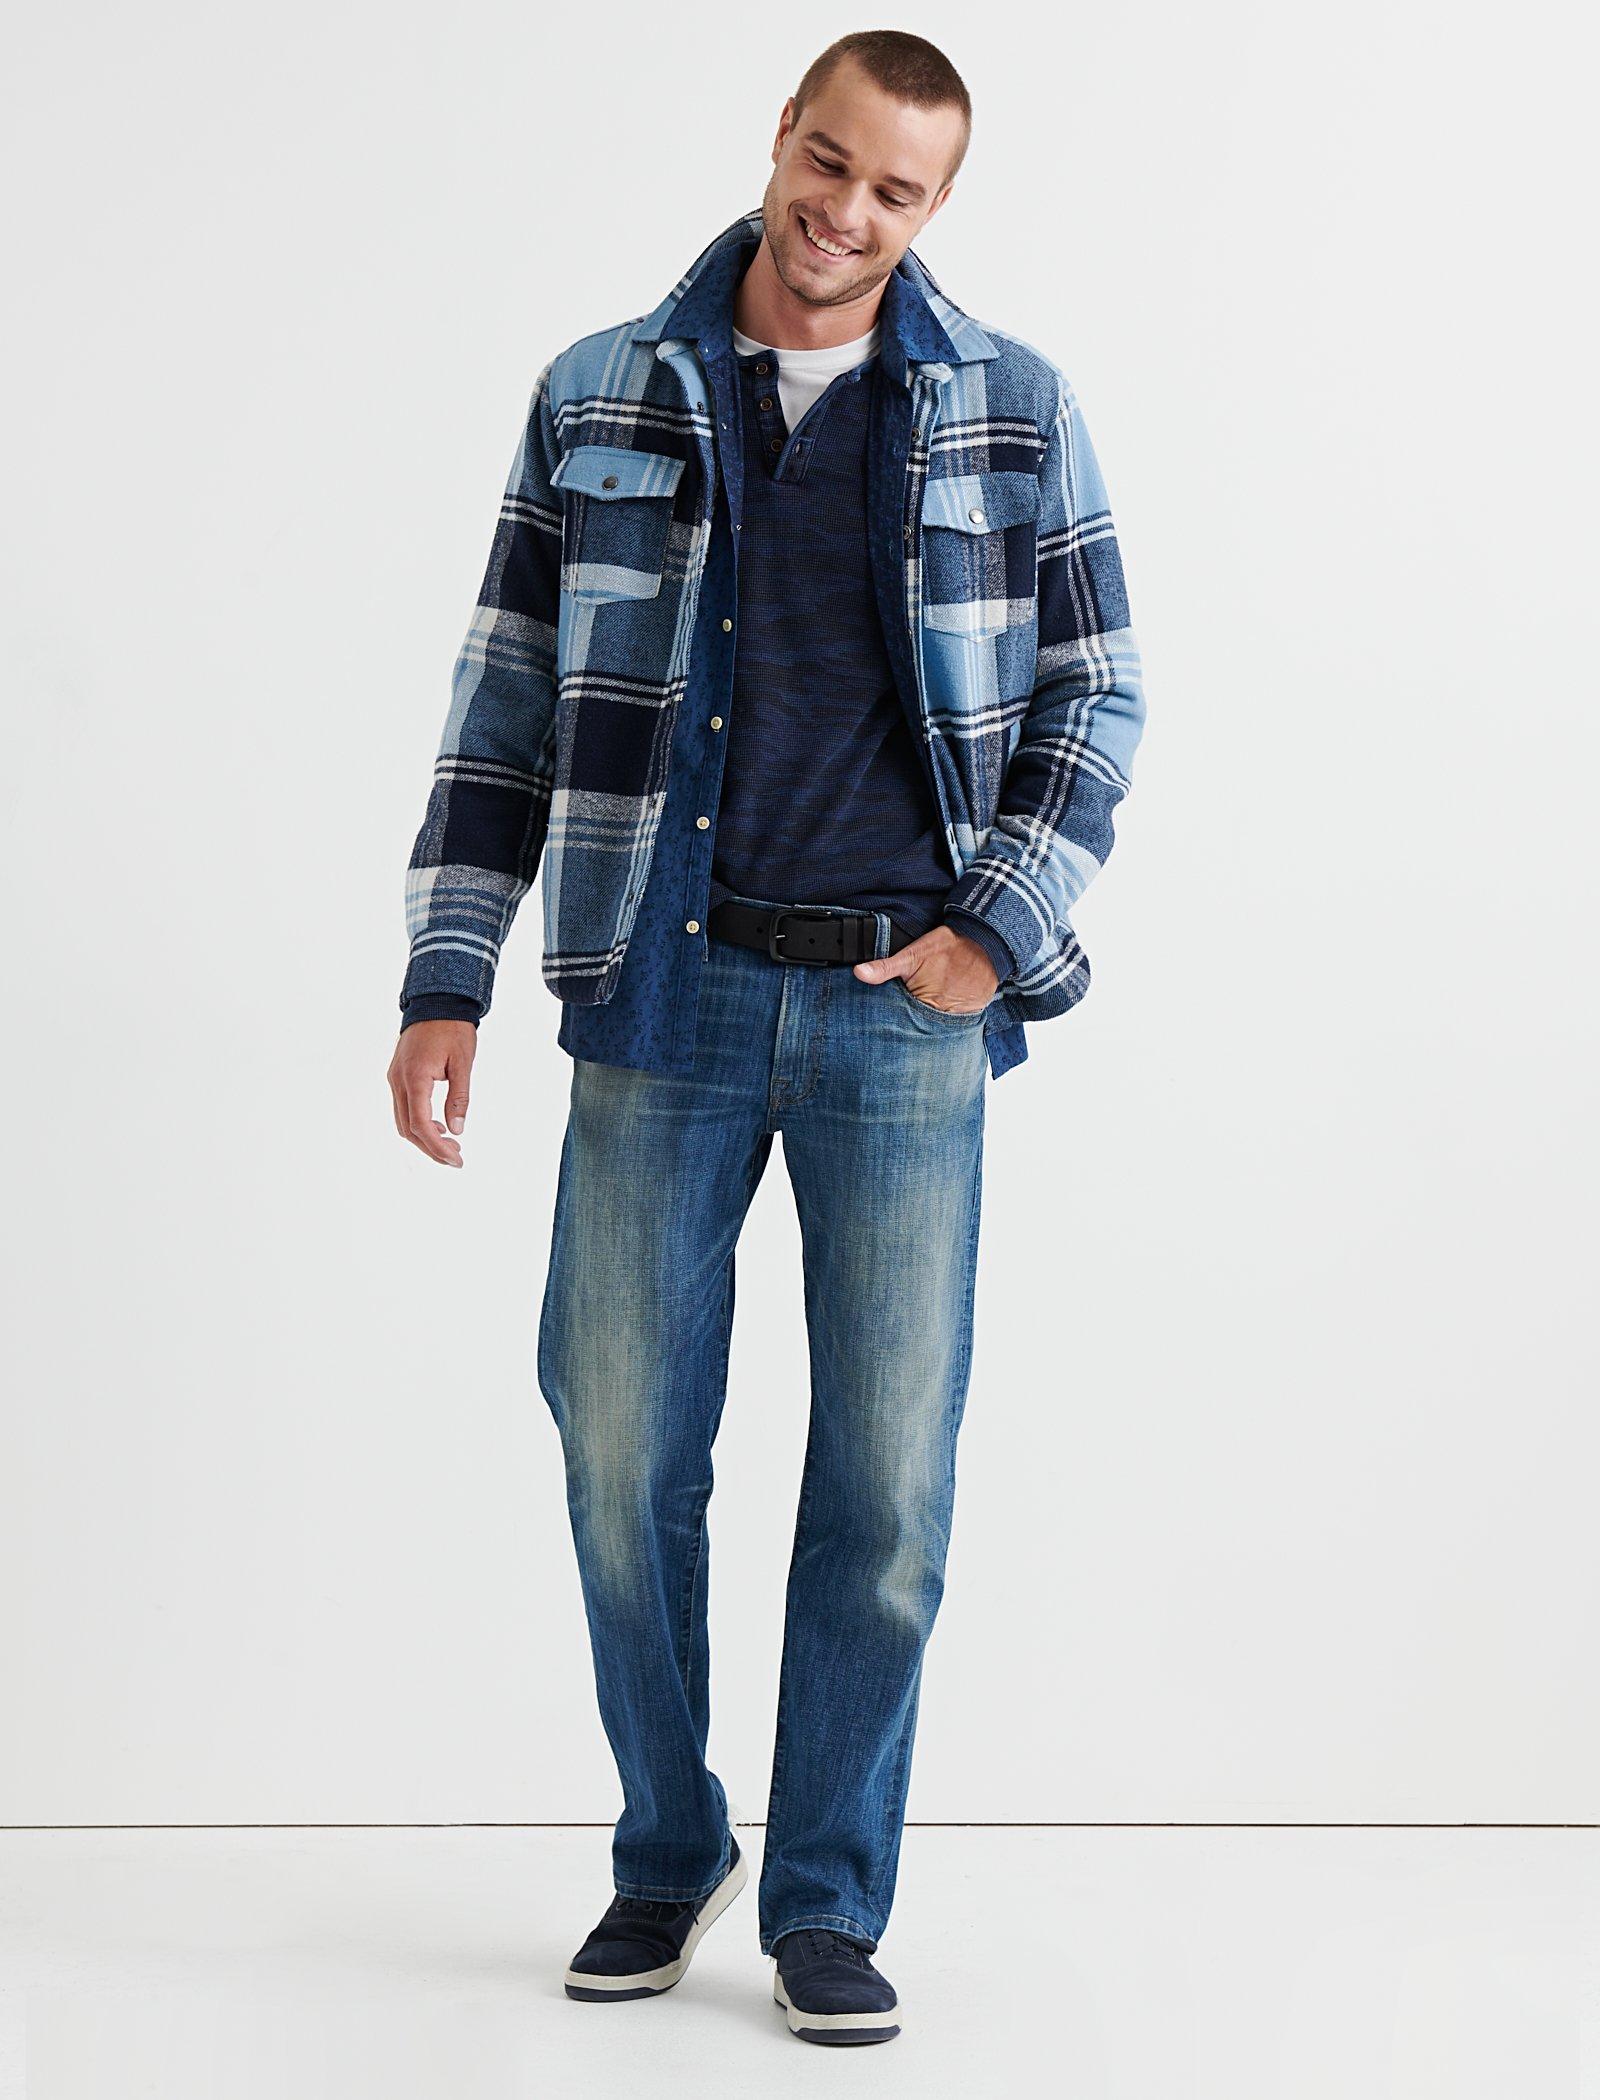 Buy a Lucky Brand Mens Flannel Shirt Jacket